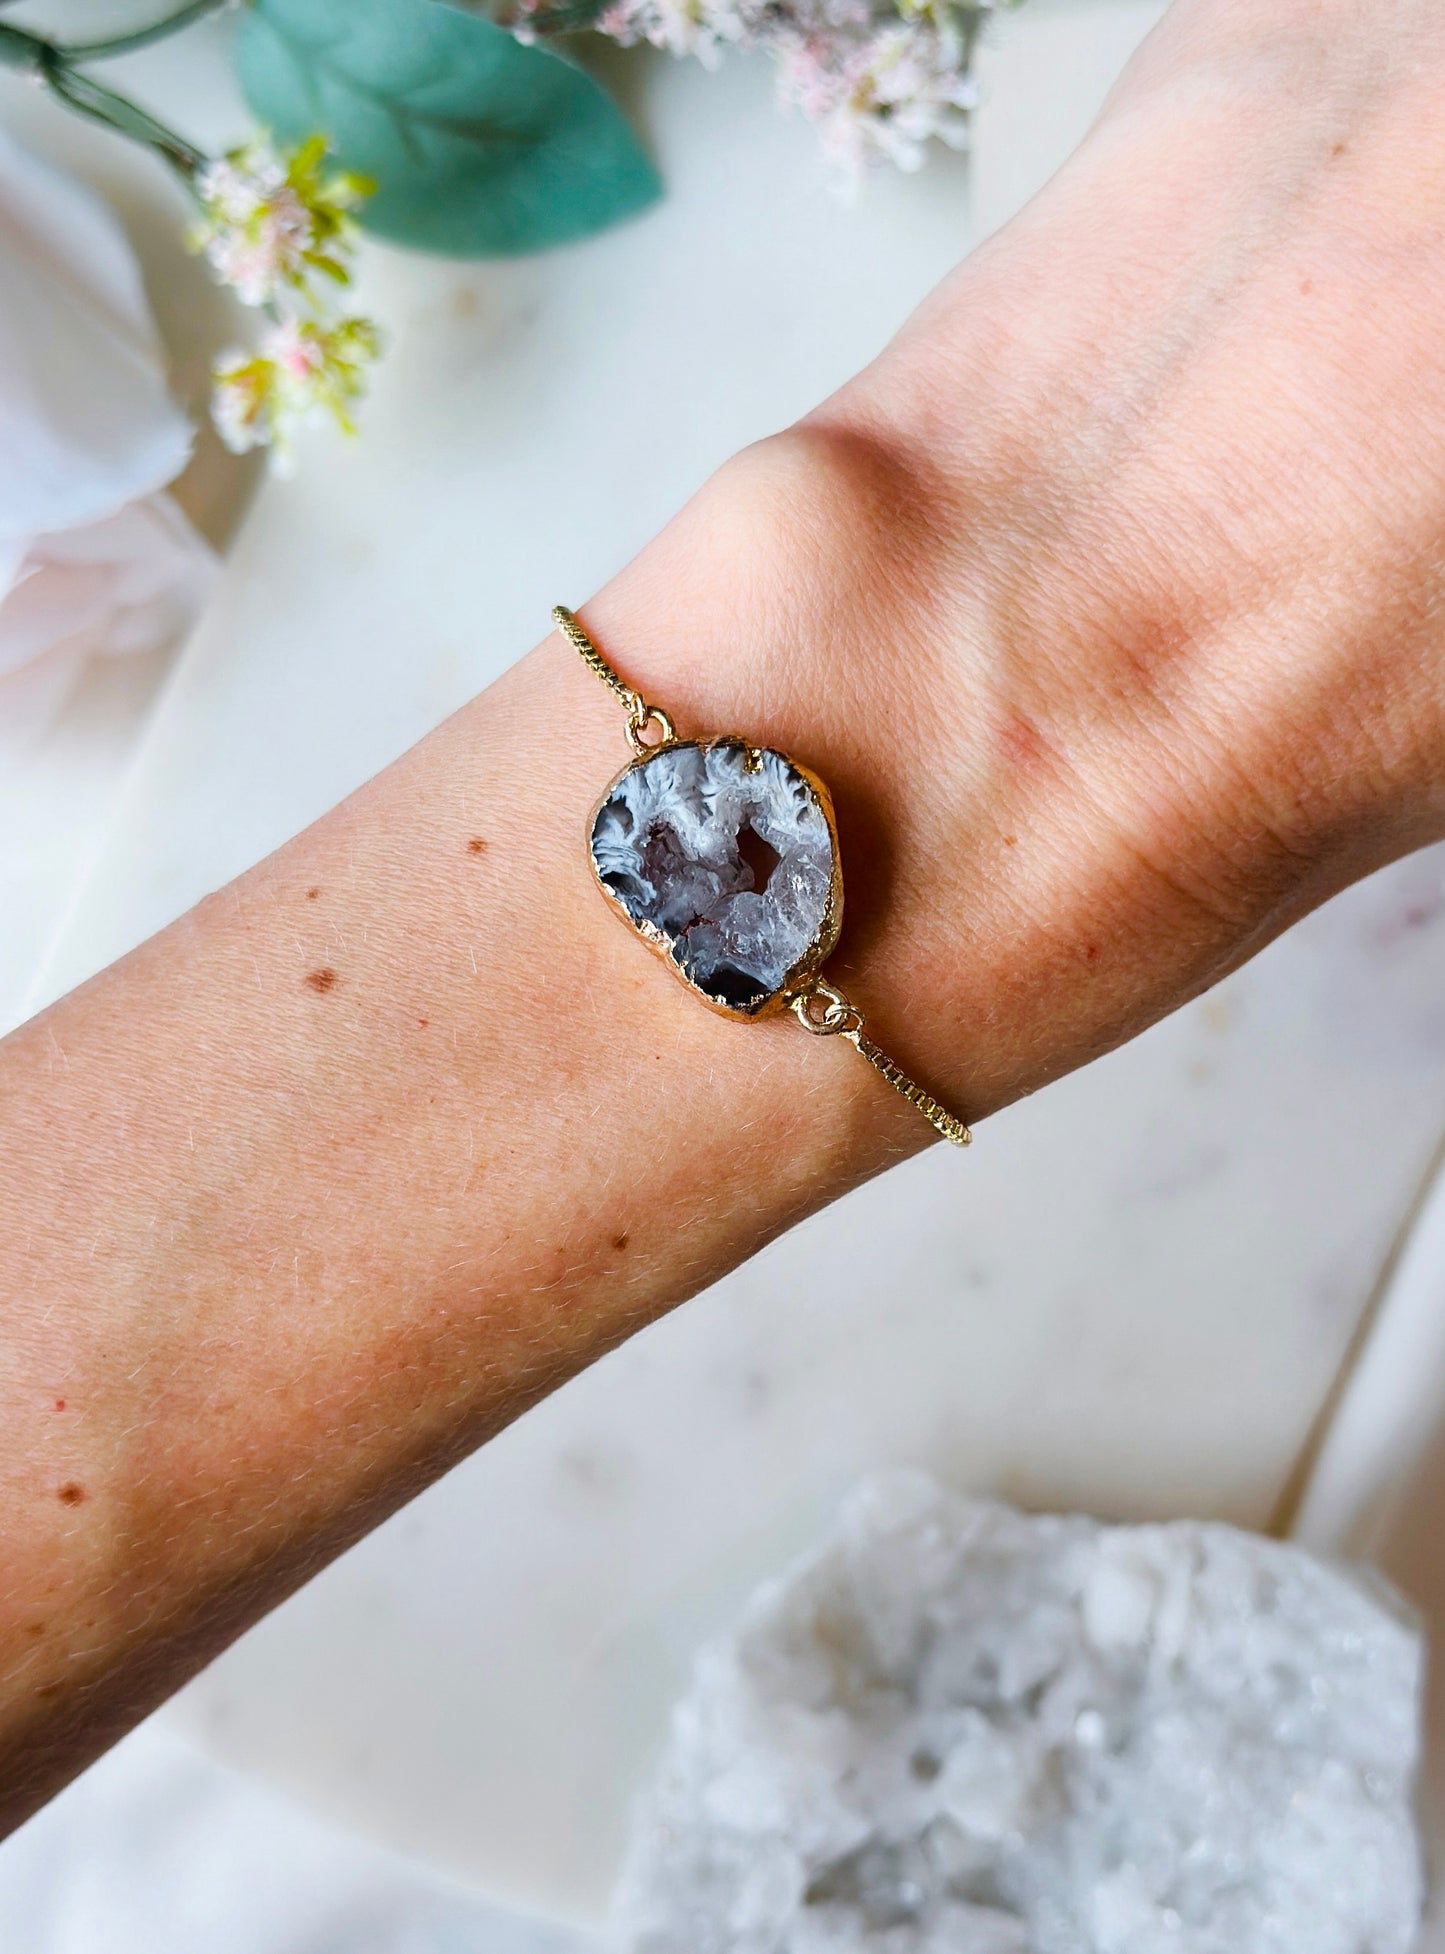 The Gold Agate Geode Minimalist